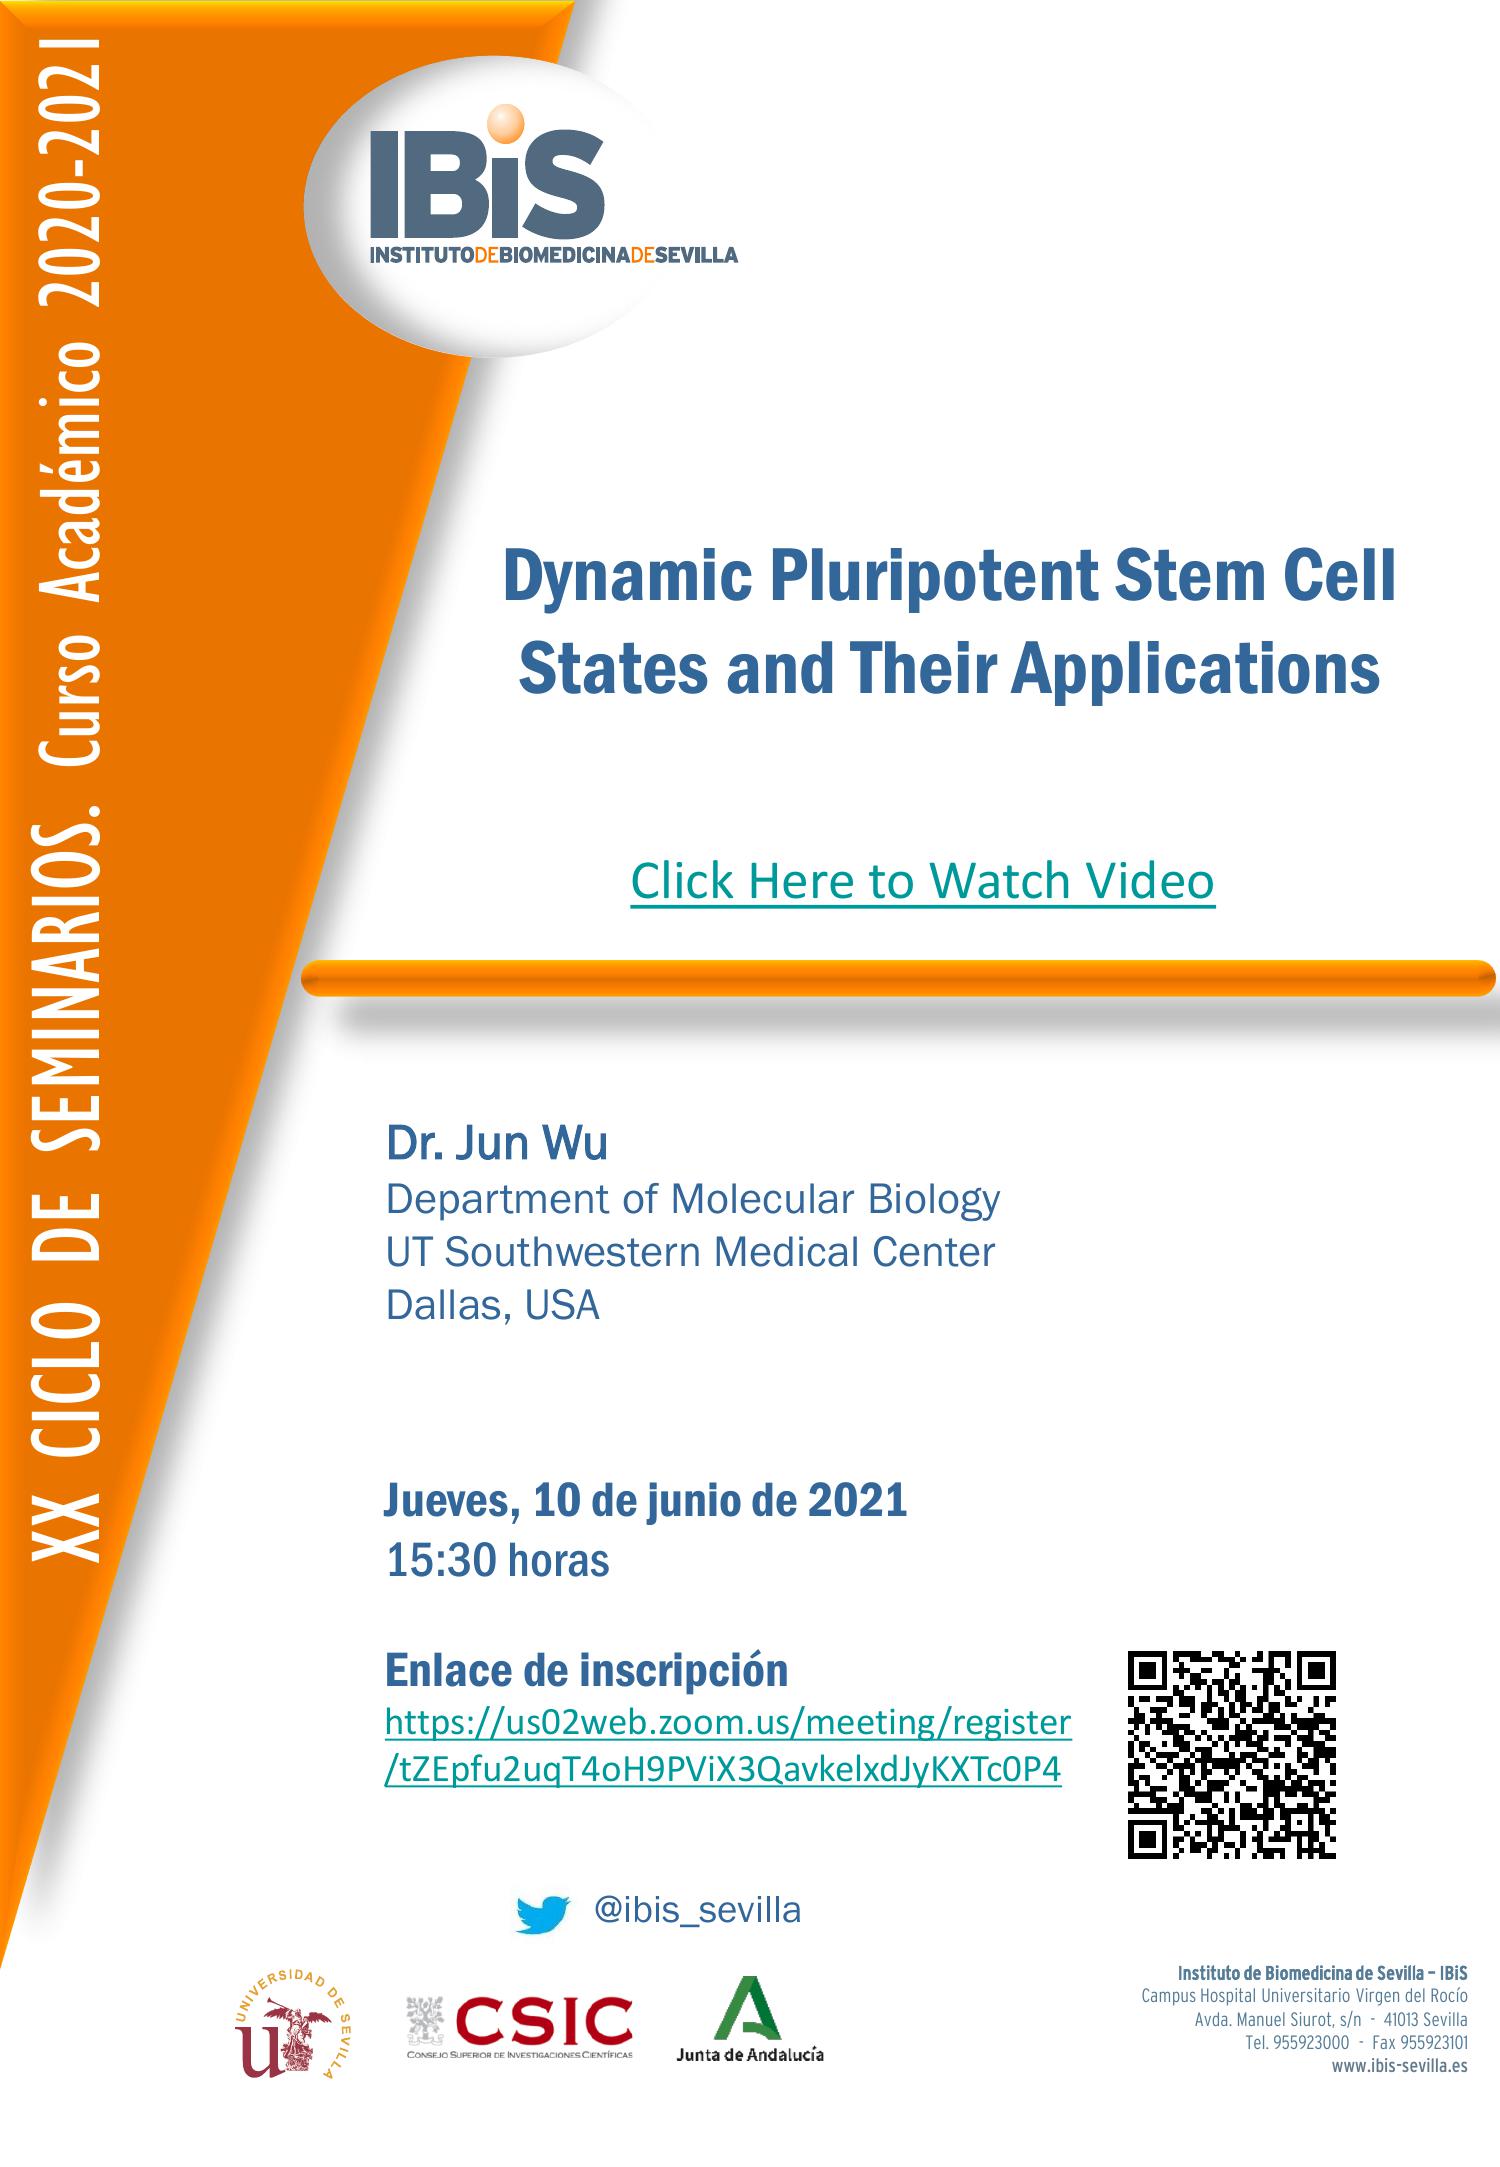 Poster: Dynamic Pluripotent Stem Cell States and Their Applications